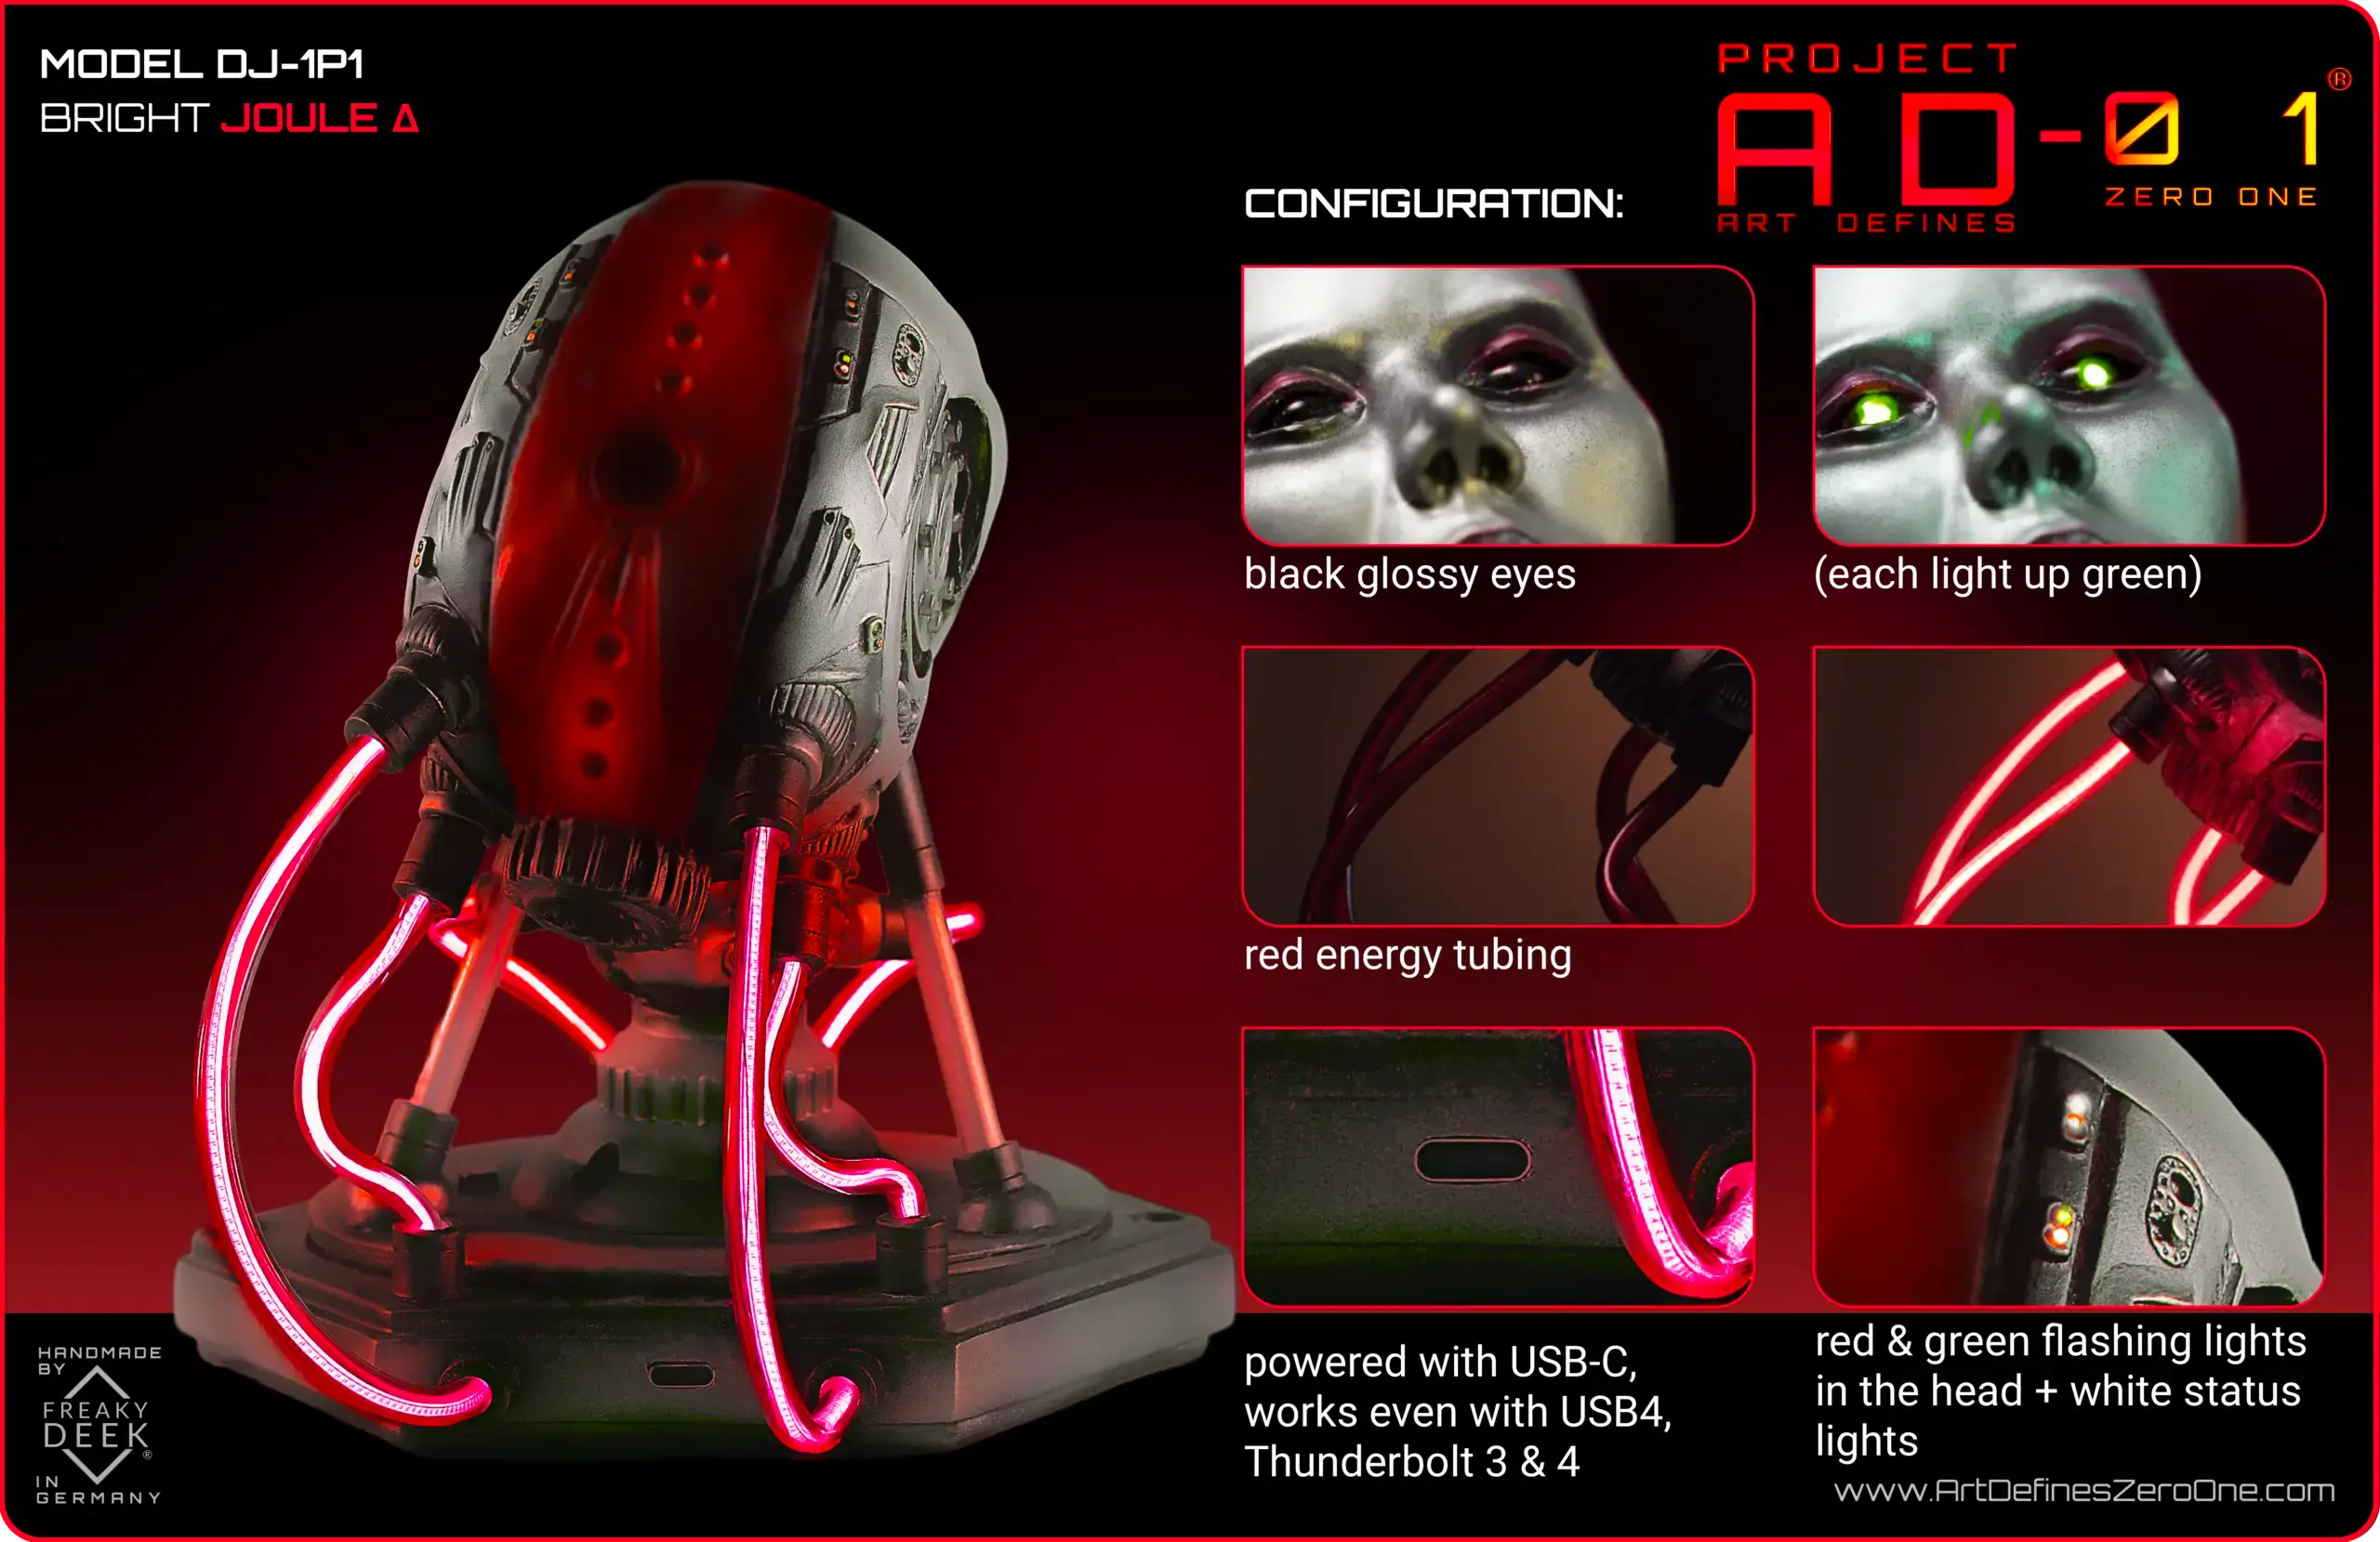 Project AD-01 DJ-1P1 handmade android sculpture bright Joule with red LED energy tubes, product configuration: black glossy LED eyes, with electronics, USB-C, red metallic design, flashing LEDs, weight: apx. 800g